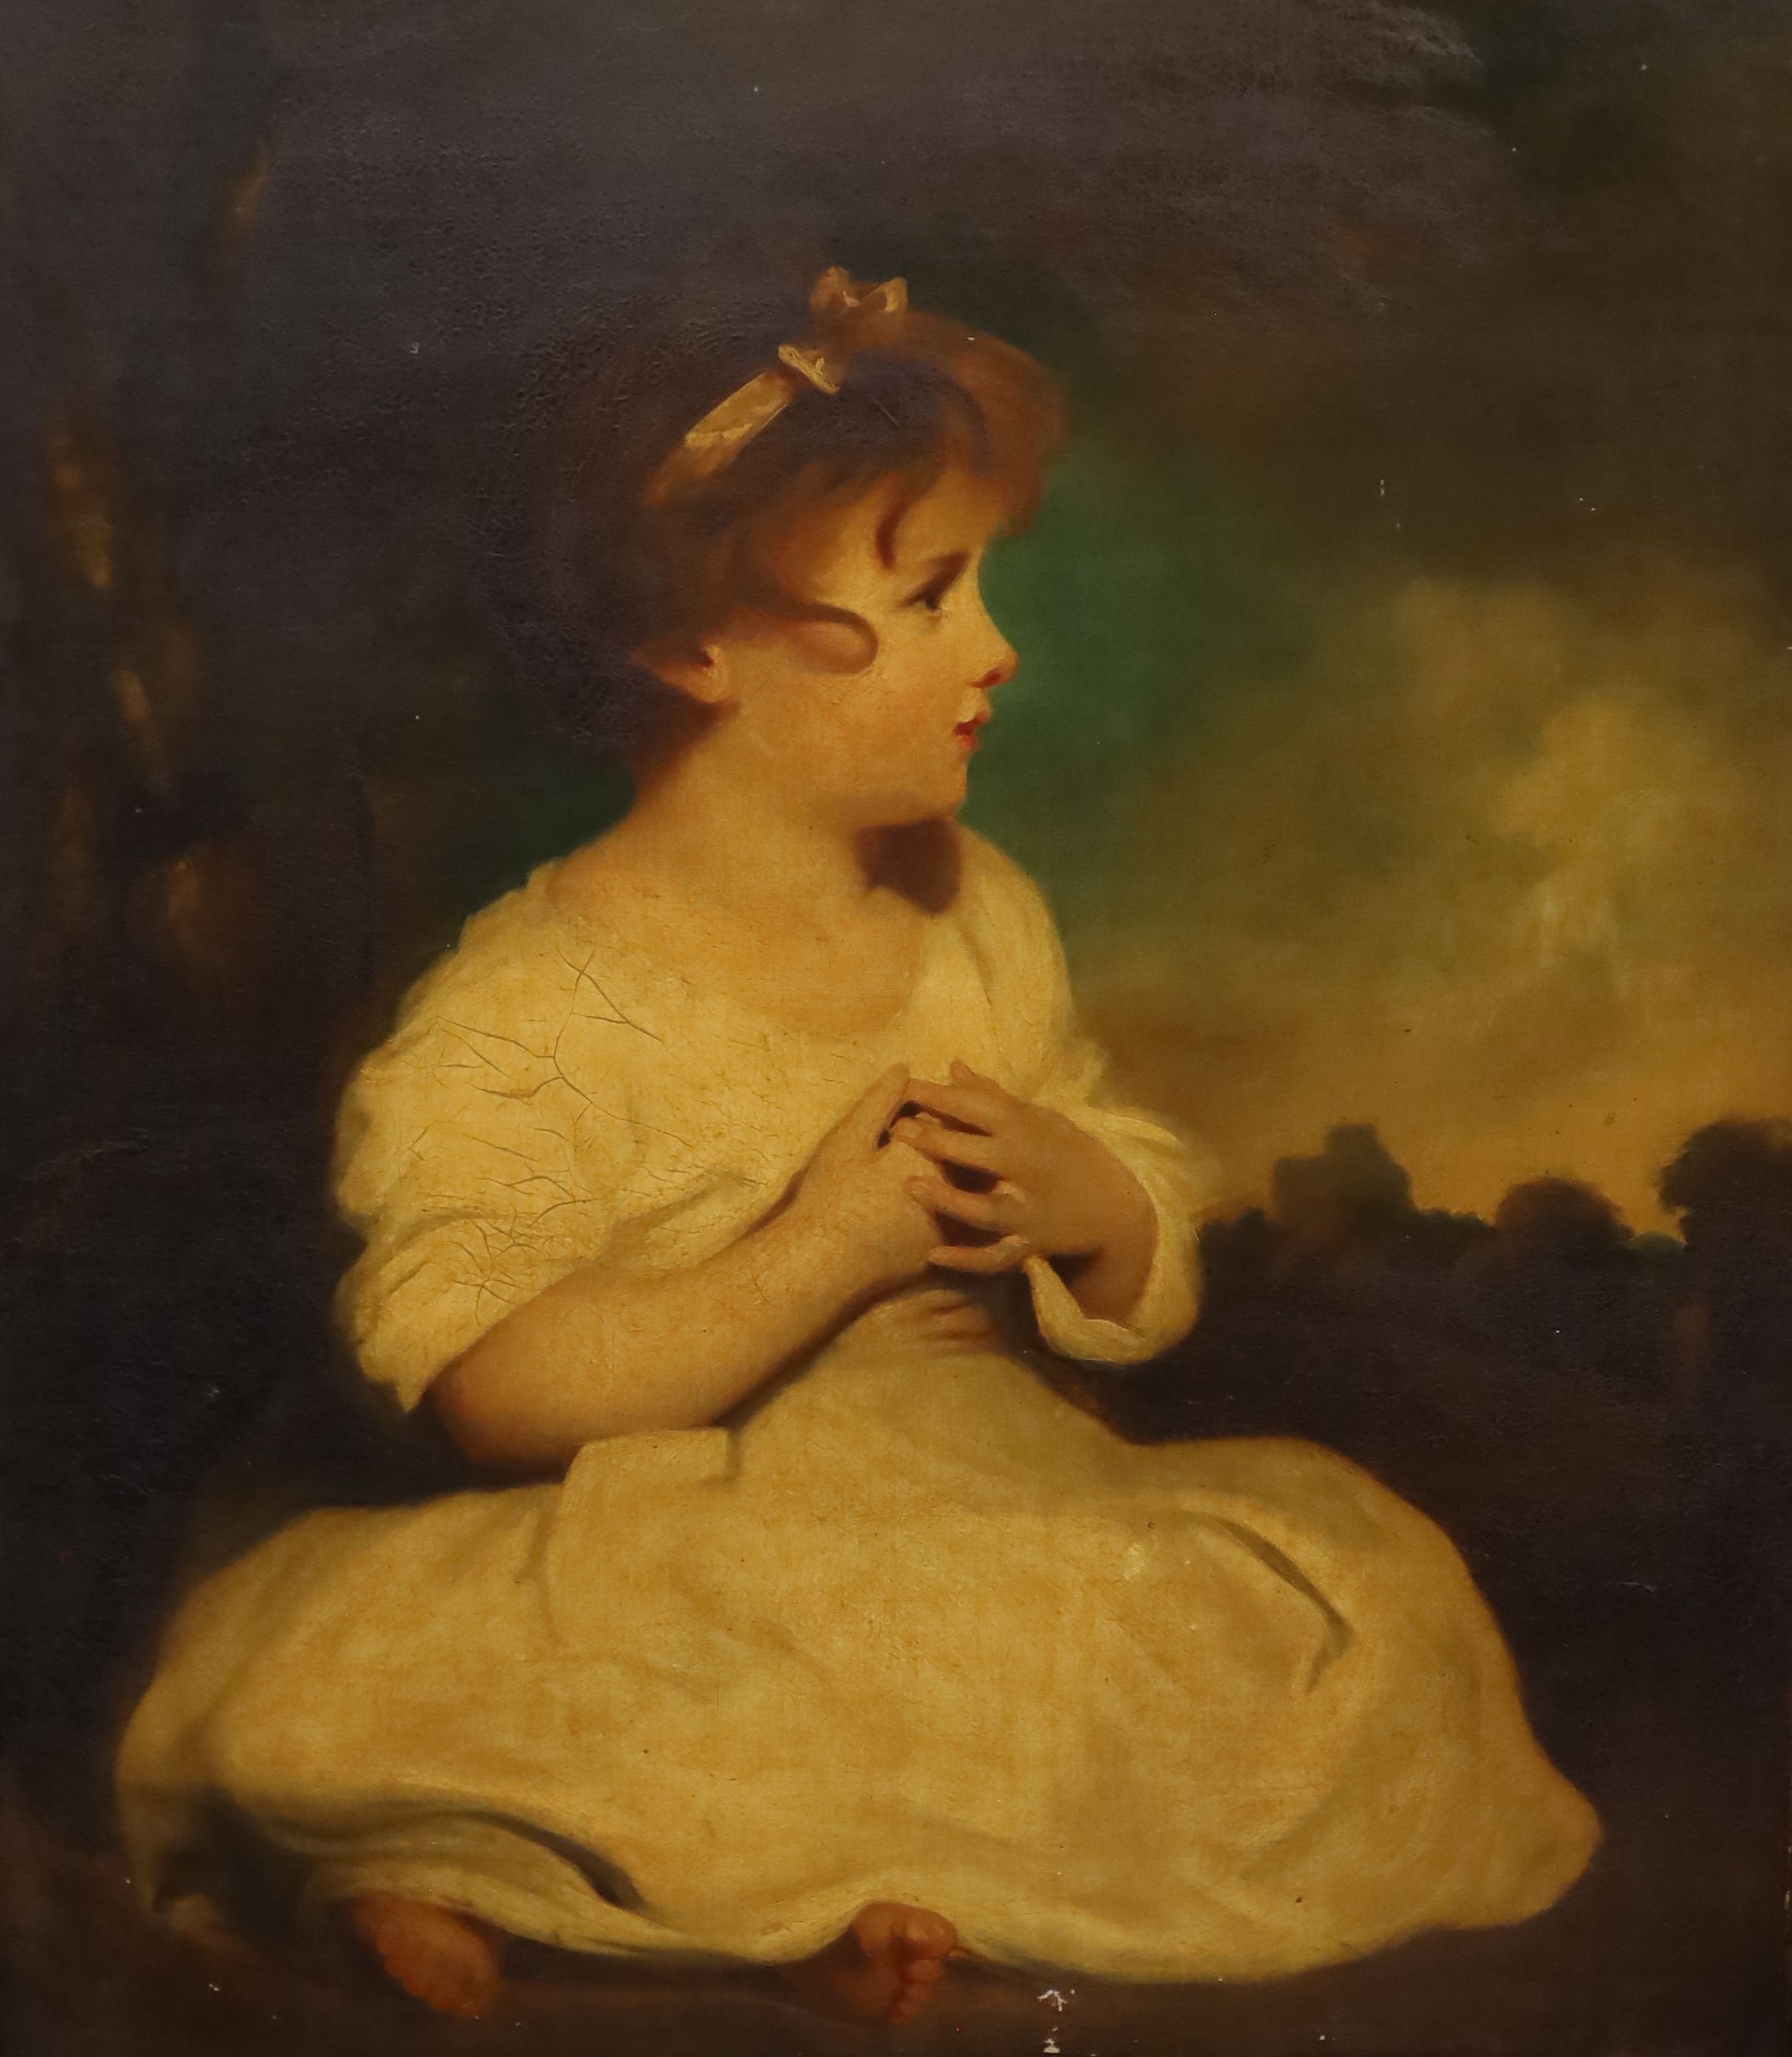 After Sir Joshua Reynolds (1723-1792), The Age of Innocence, oil on canvas, 77 x 64cm.